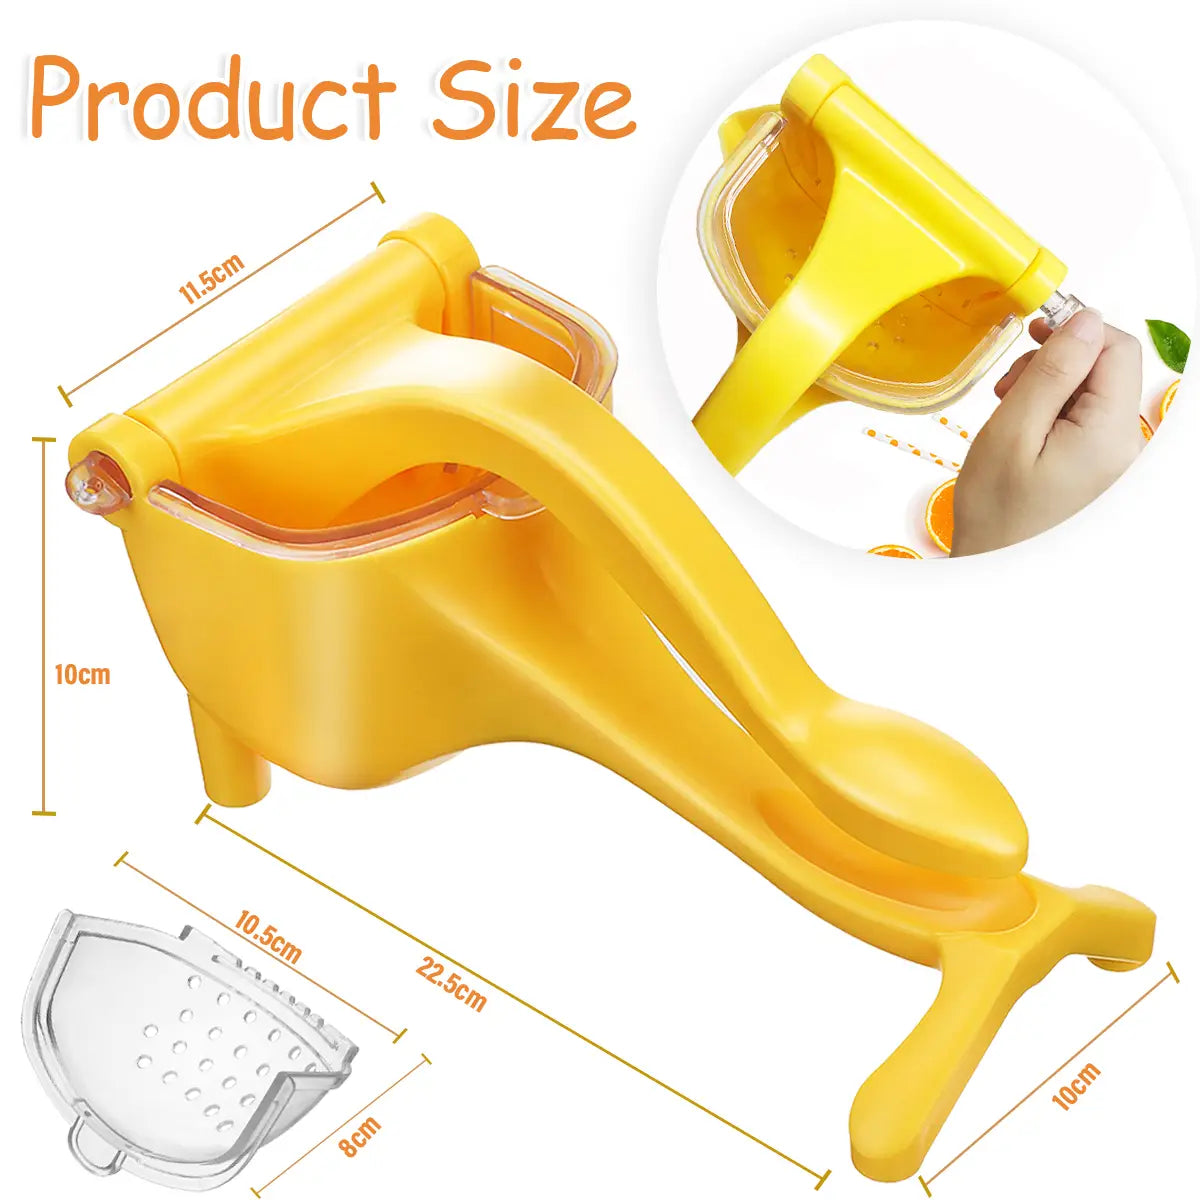 Anti-drip Fruit Juicer Removable Easy Clean